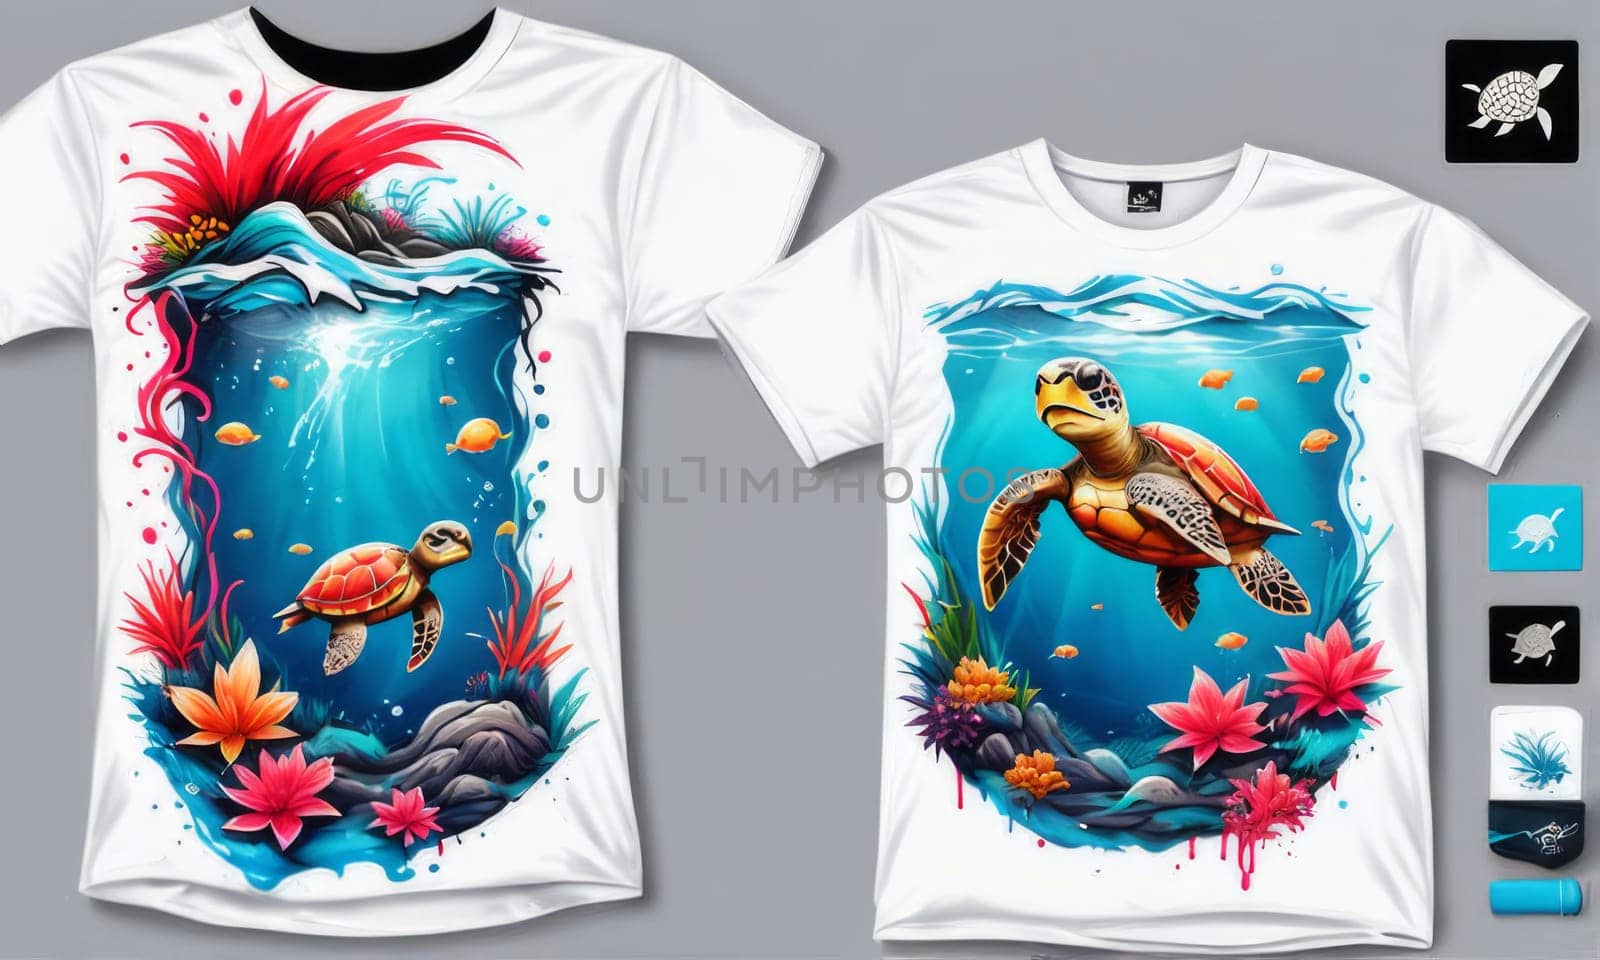 Majestic turtle gracefully swimming in blue ocean, depicted on tshirt. For clothing design, animal themed clothing advertising, simply as illustration for interesting clothing style, Tshirt print. by Angelsmoon